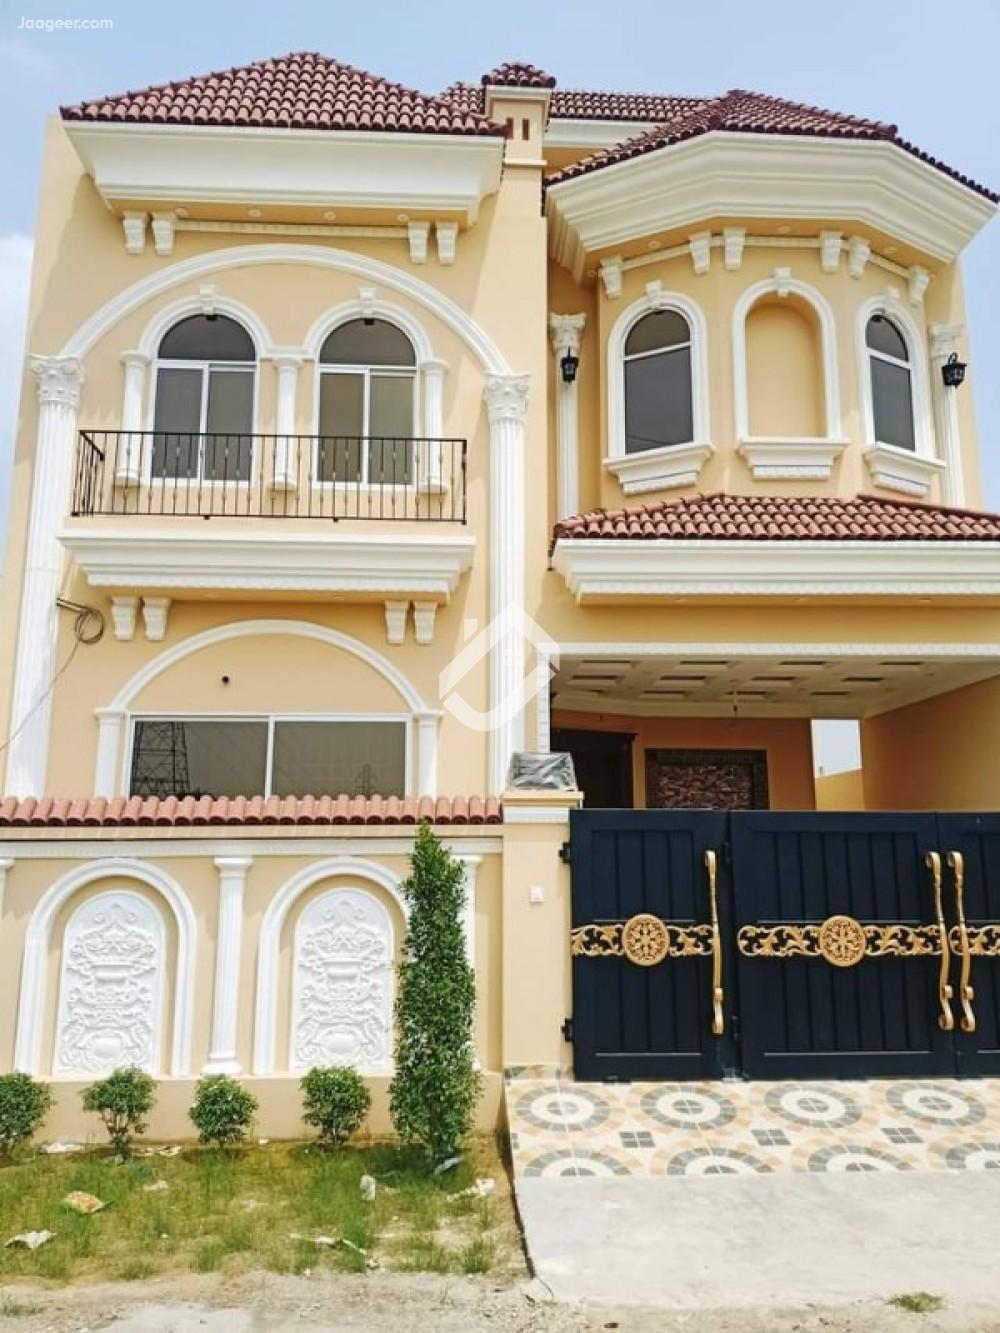 Main image 7 Marla Double Storey Furnished House For Sale In Shaheen Villas Phase-1 Shaheen Villas, Sheikhupura